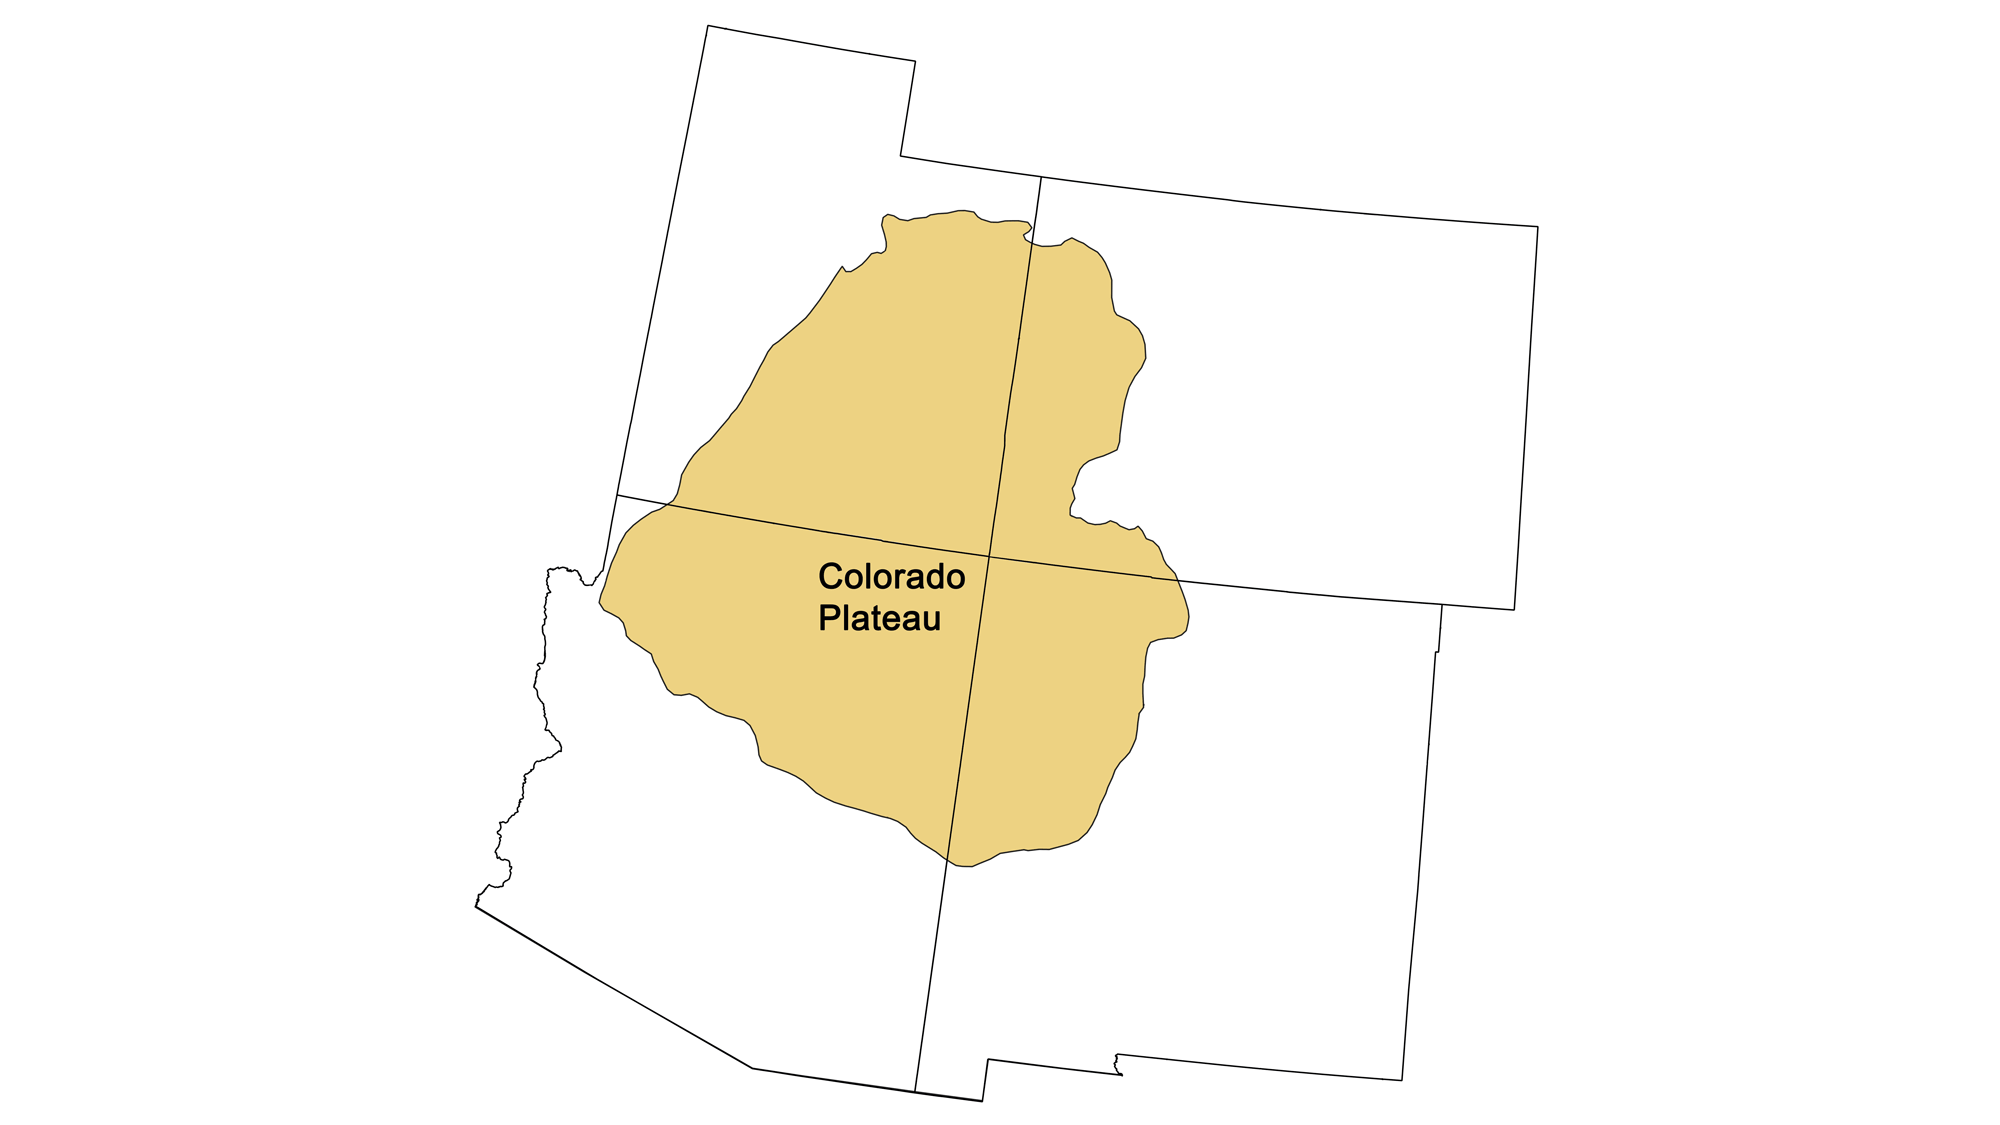 Simple map showing the area of the Colorado Plateau province of the southwestern United States.